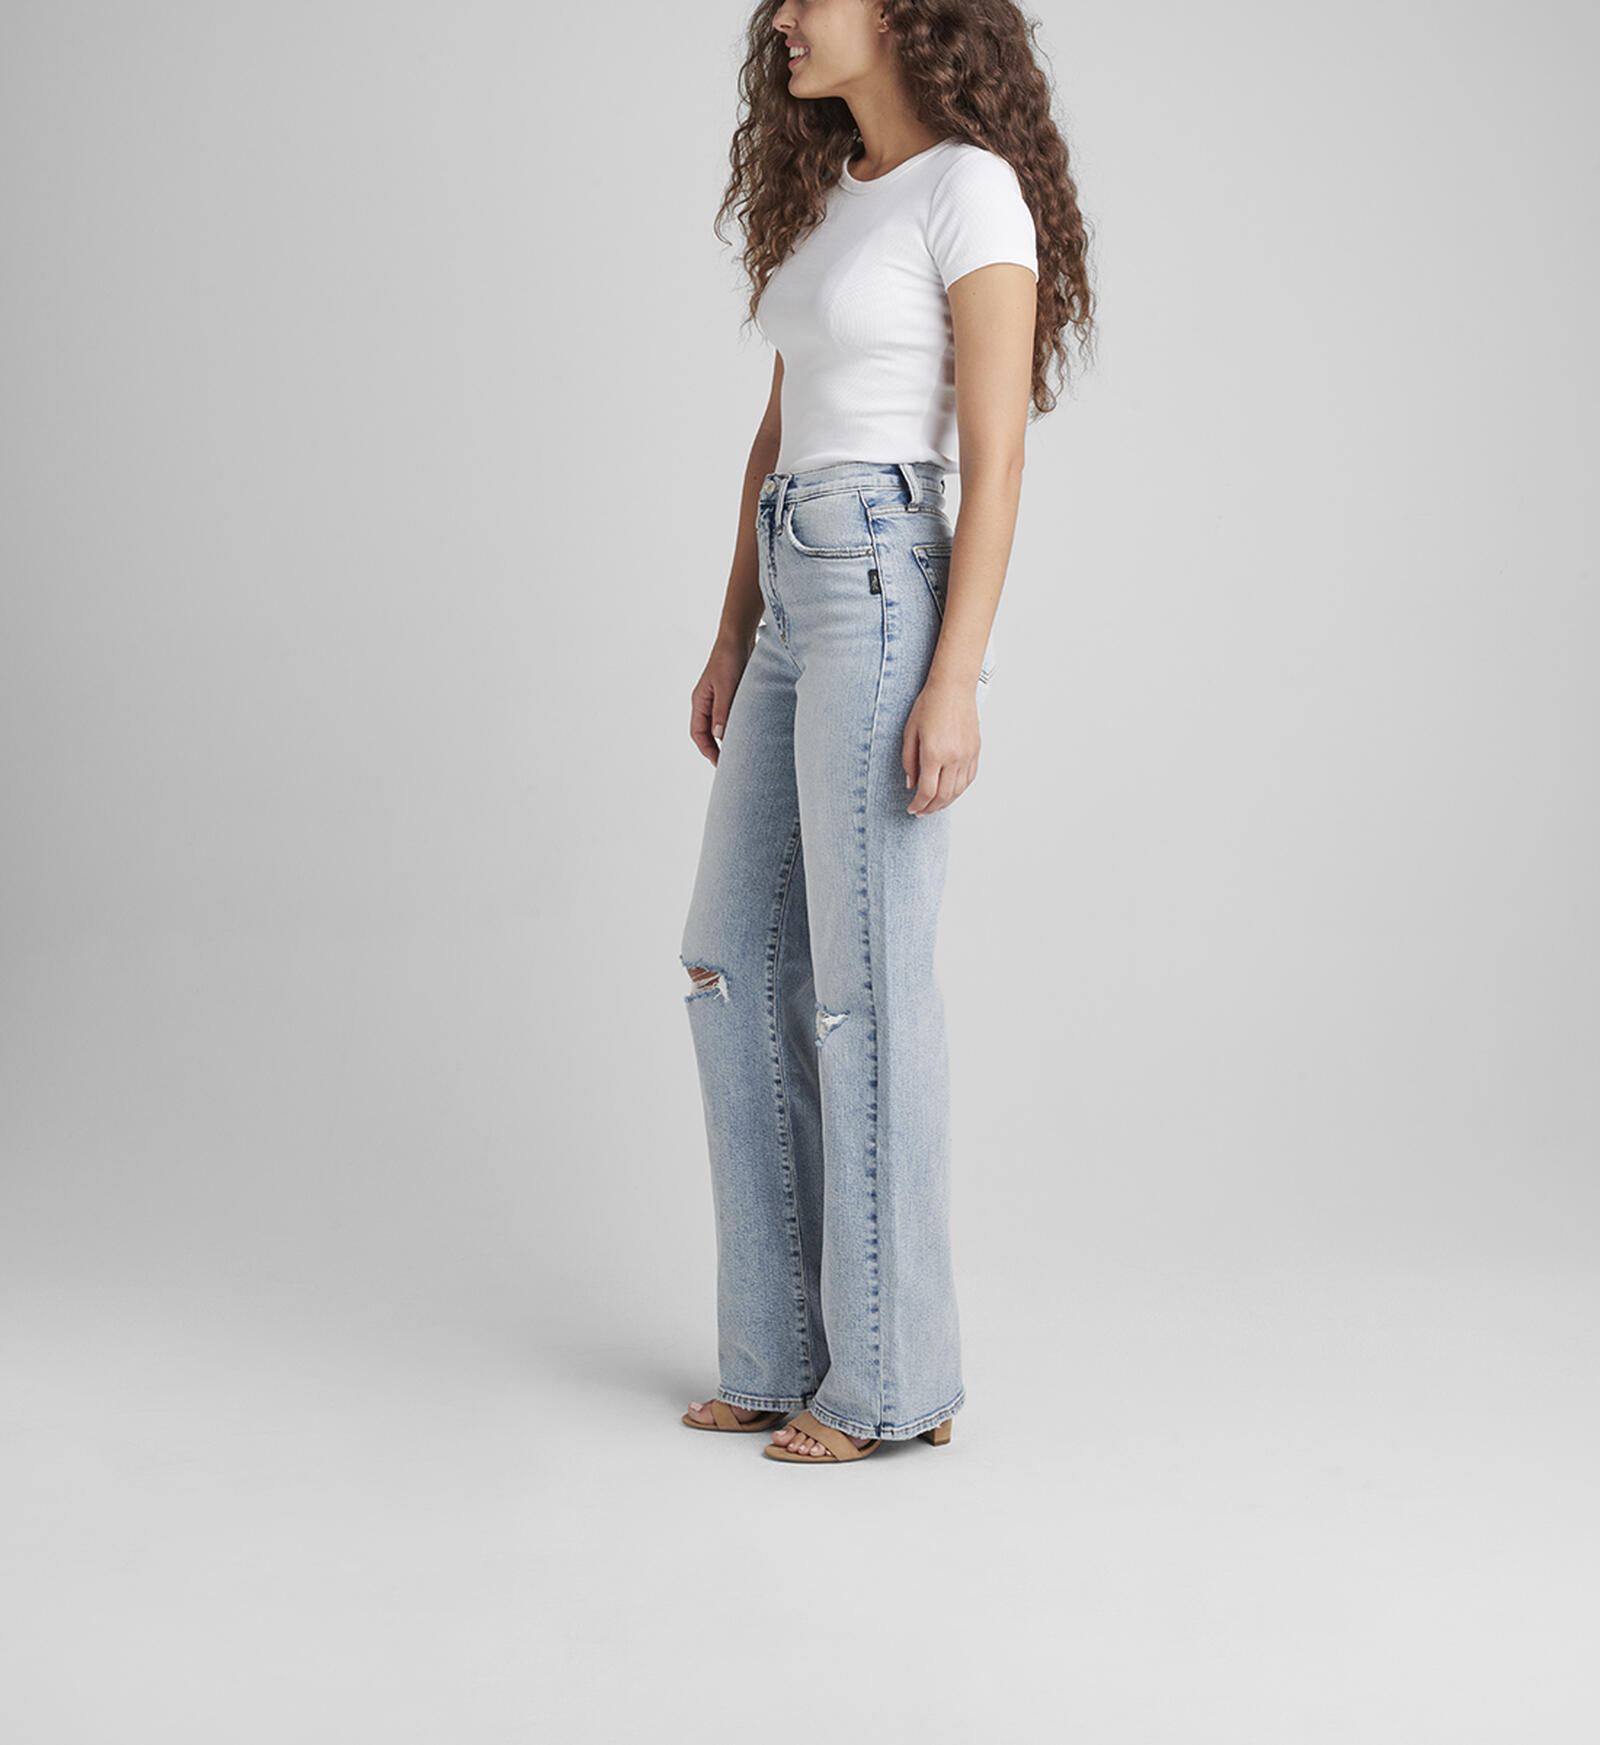 Silver Jeans Co . Highly Desira ble Trouser Jea ns - RCS309 